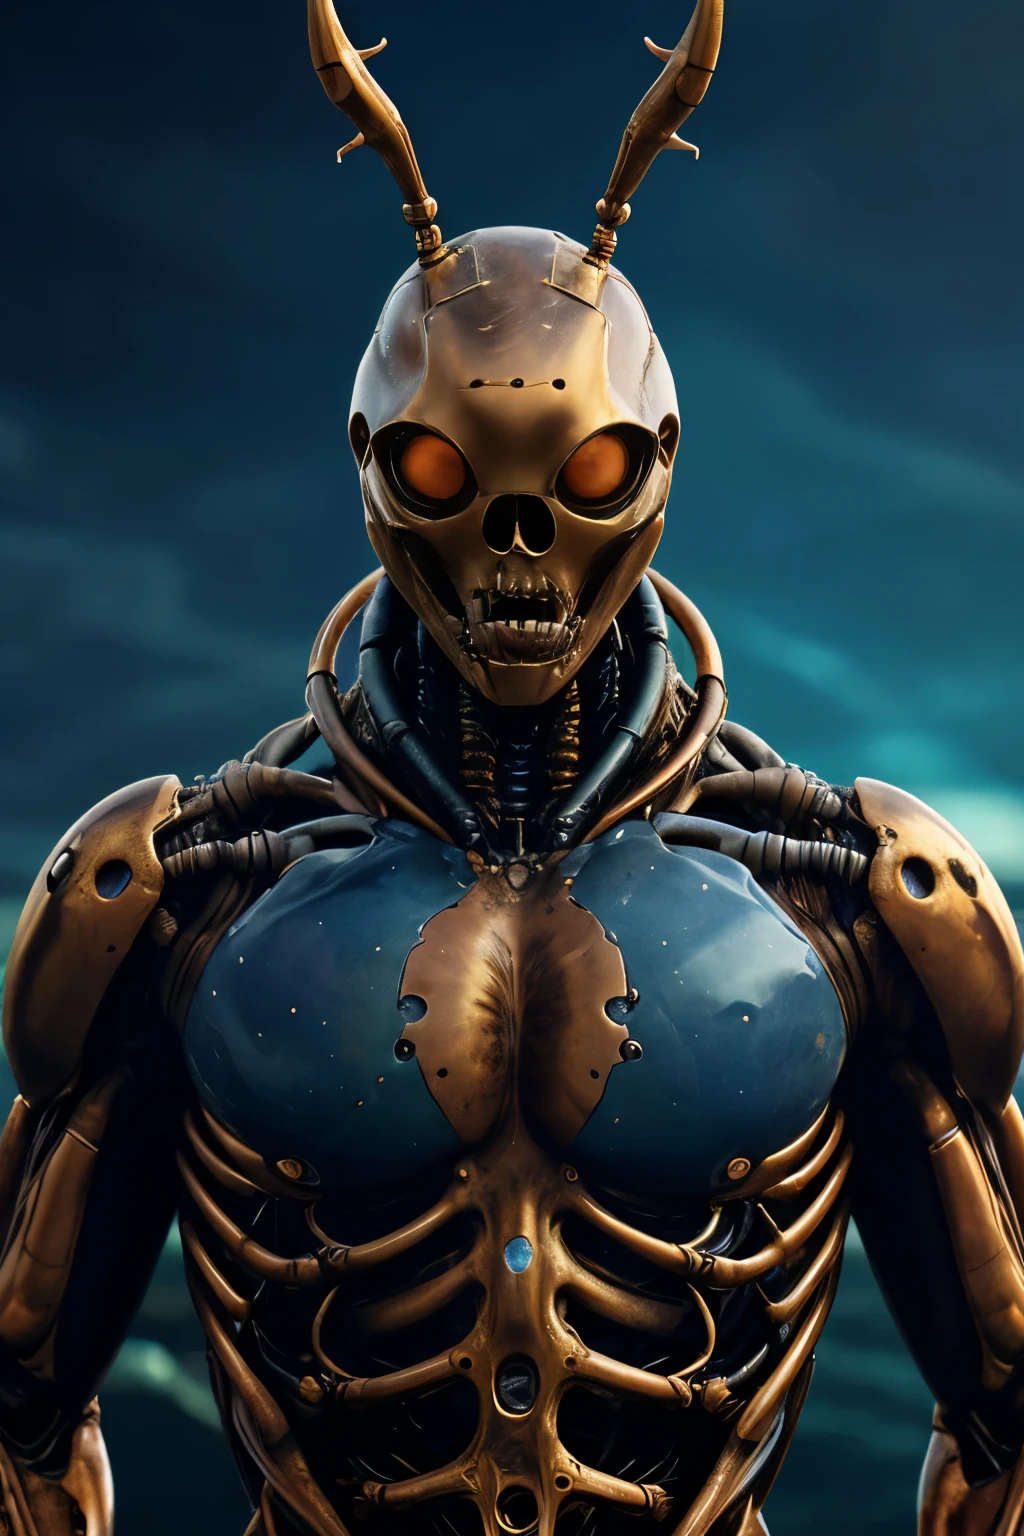 Luxury style, masterpiece, intricately detailed, best quality, hdr, 
editorial high fashion photo, biomechanical aquatic alien, antennae, glowing liquid filled clear tubing, sophisticated, high-end, luxurious, art by goro fujita, brown and bronze and blue colors, glowing eyes, sharp teeth, 
cyber, 